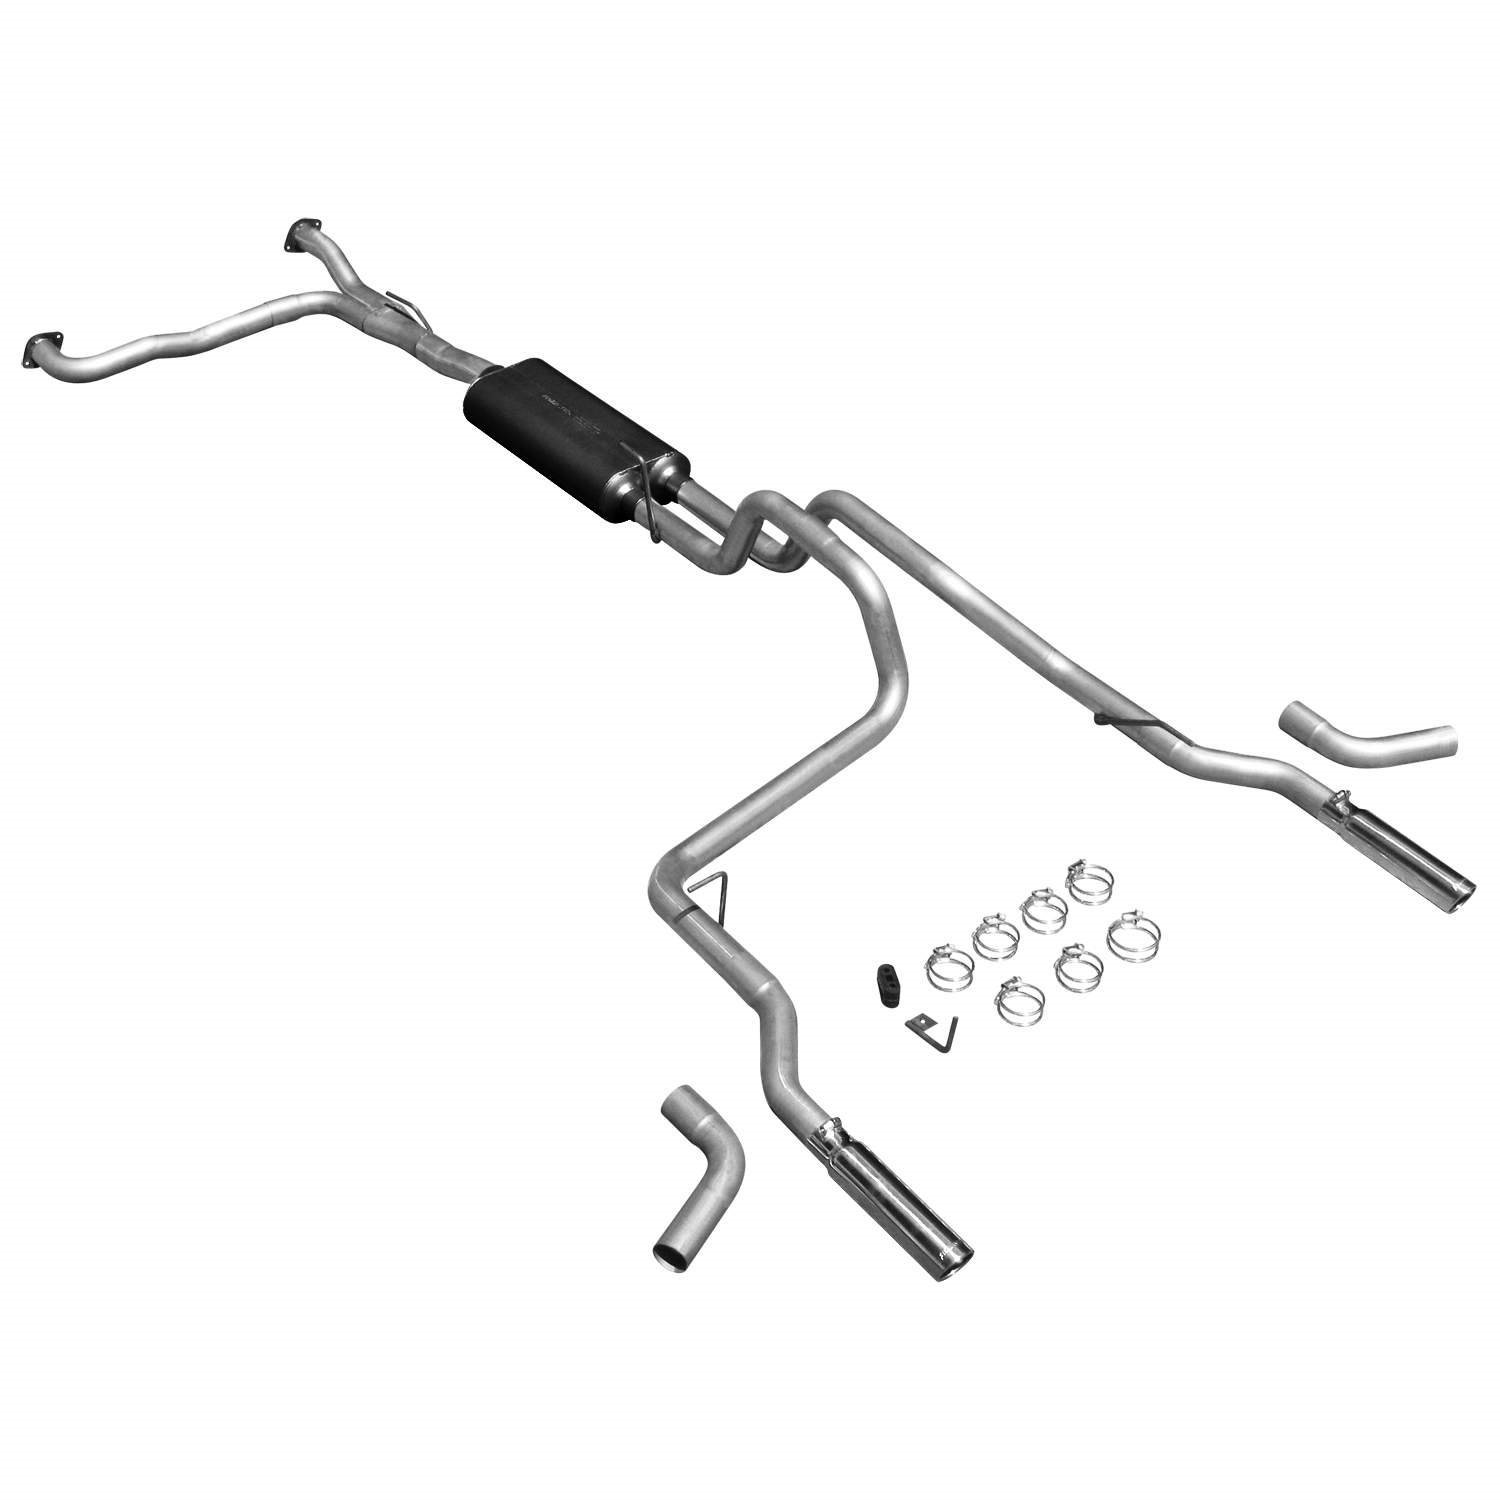 American Thunder Cat-Back Exhaust System 2004-2008 for Nissan Titan 5.6L V8 (Exc. Crew Cab)